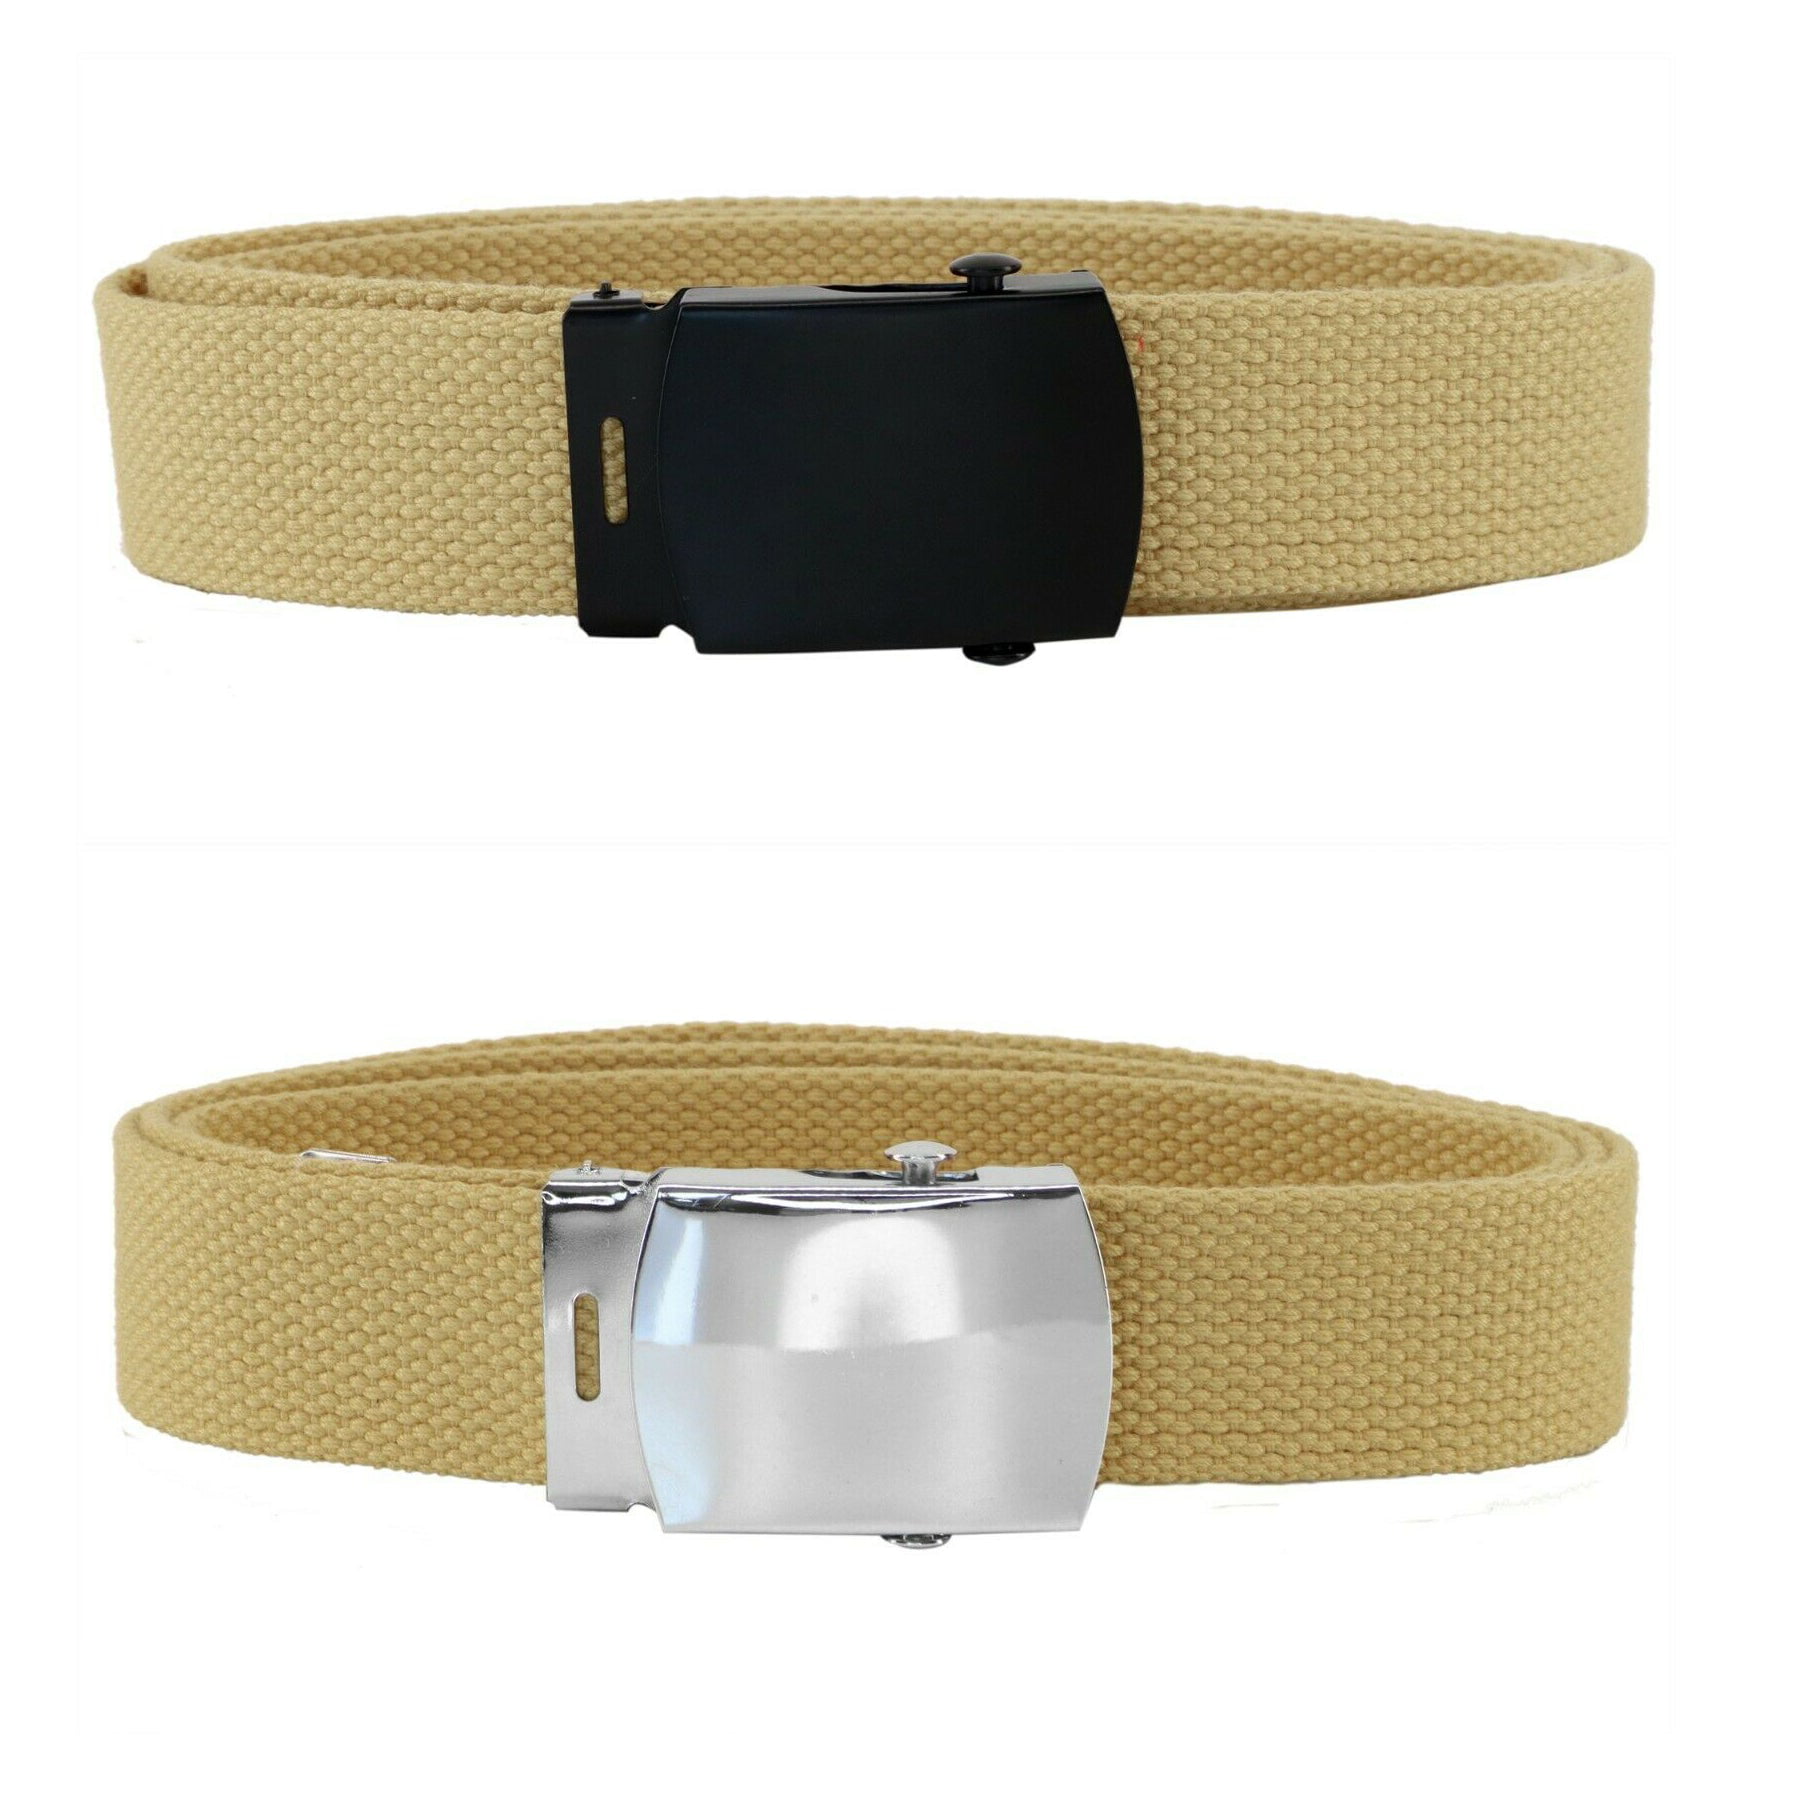 NEW Military Web Canvas Belts w/ Buckle Many Colors 100% Cotton 45 Inches Long 